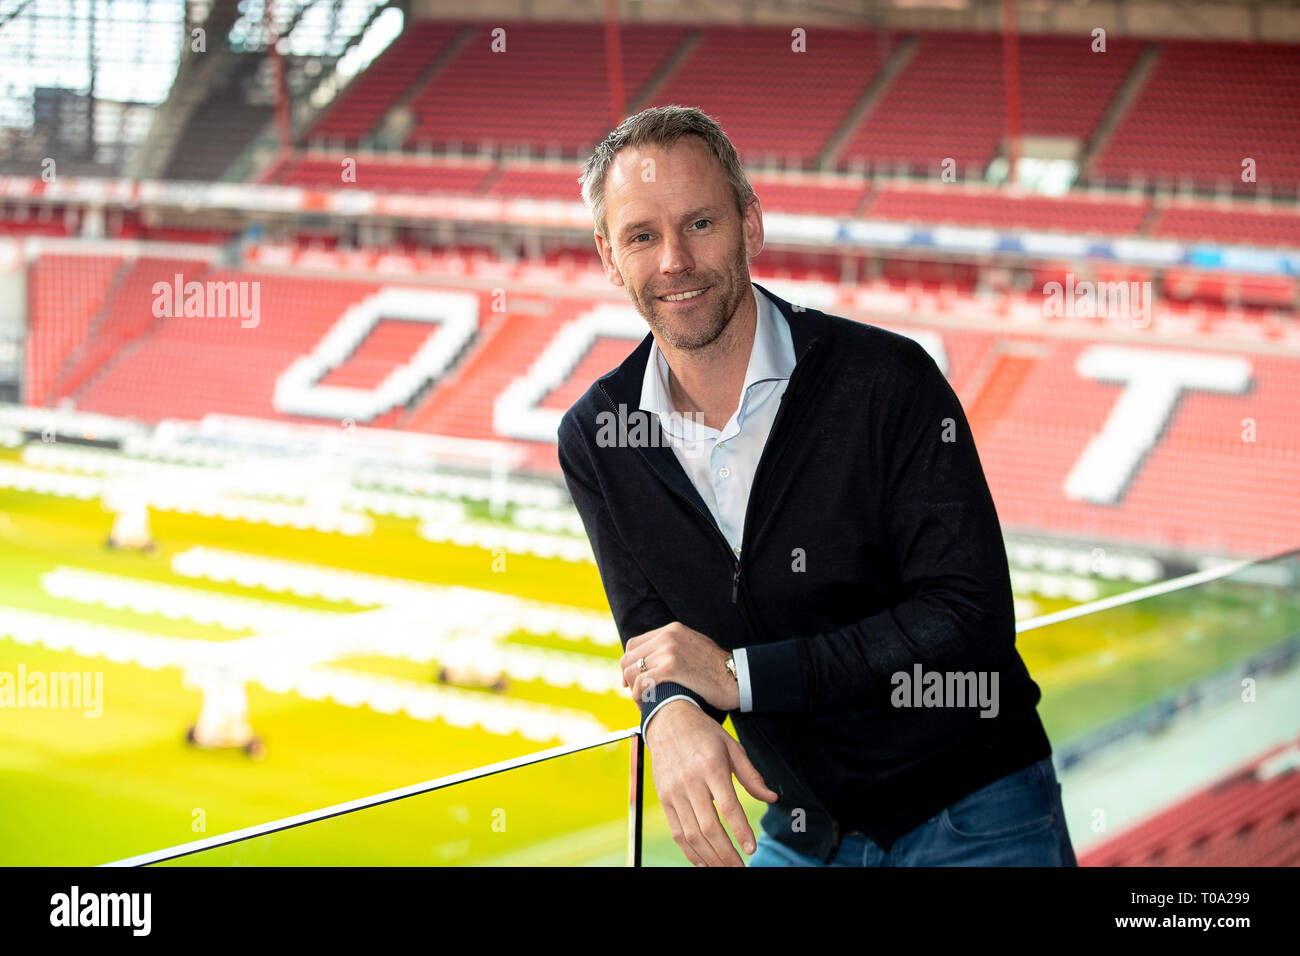 EINDHOVEN, Fotosessie Andre Ooijer, 18-03-2019 Fußball, Philips Stadion Stadion. Andre Ooijer beim Fotoshooting. Stockfoto